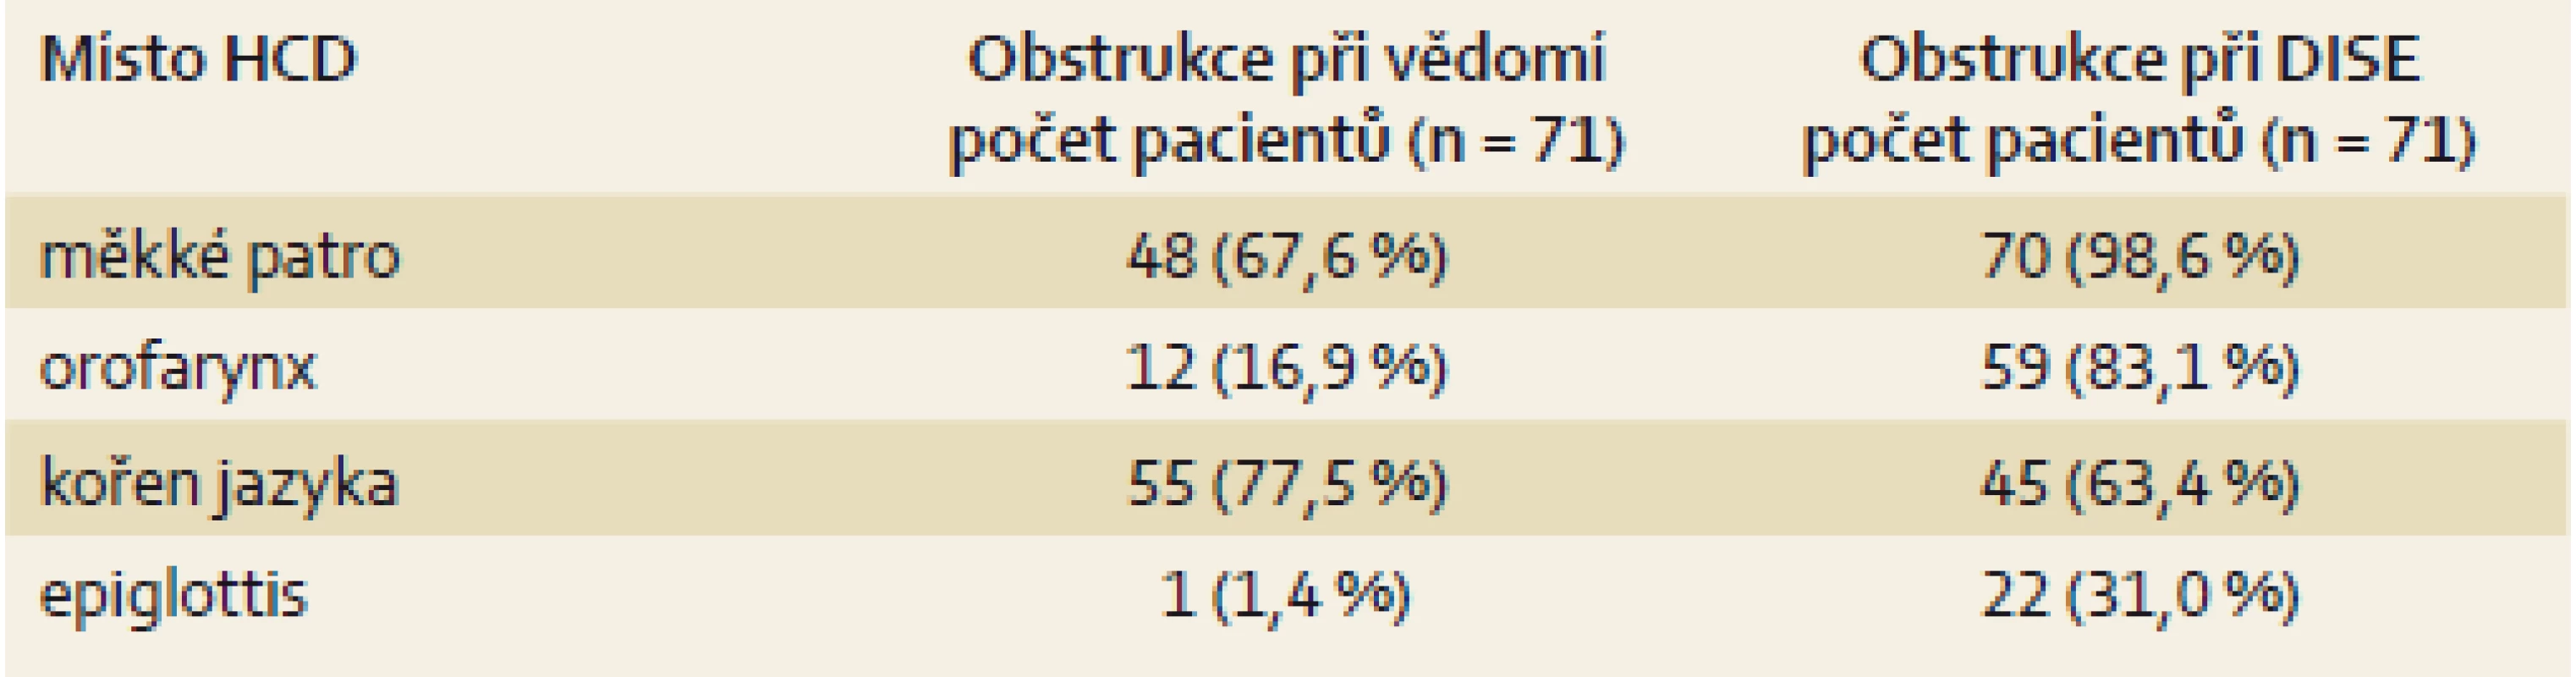 Srovnání obstrukce HCD při vědomí a při DISE.
Tab. 3. Obstruction of the upper airway during wakefulness and during drug-induced sleep endoscopy.